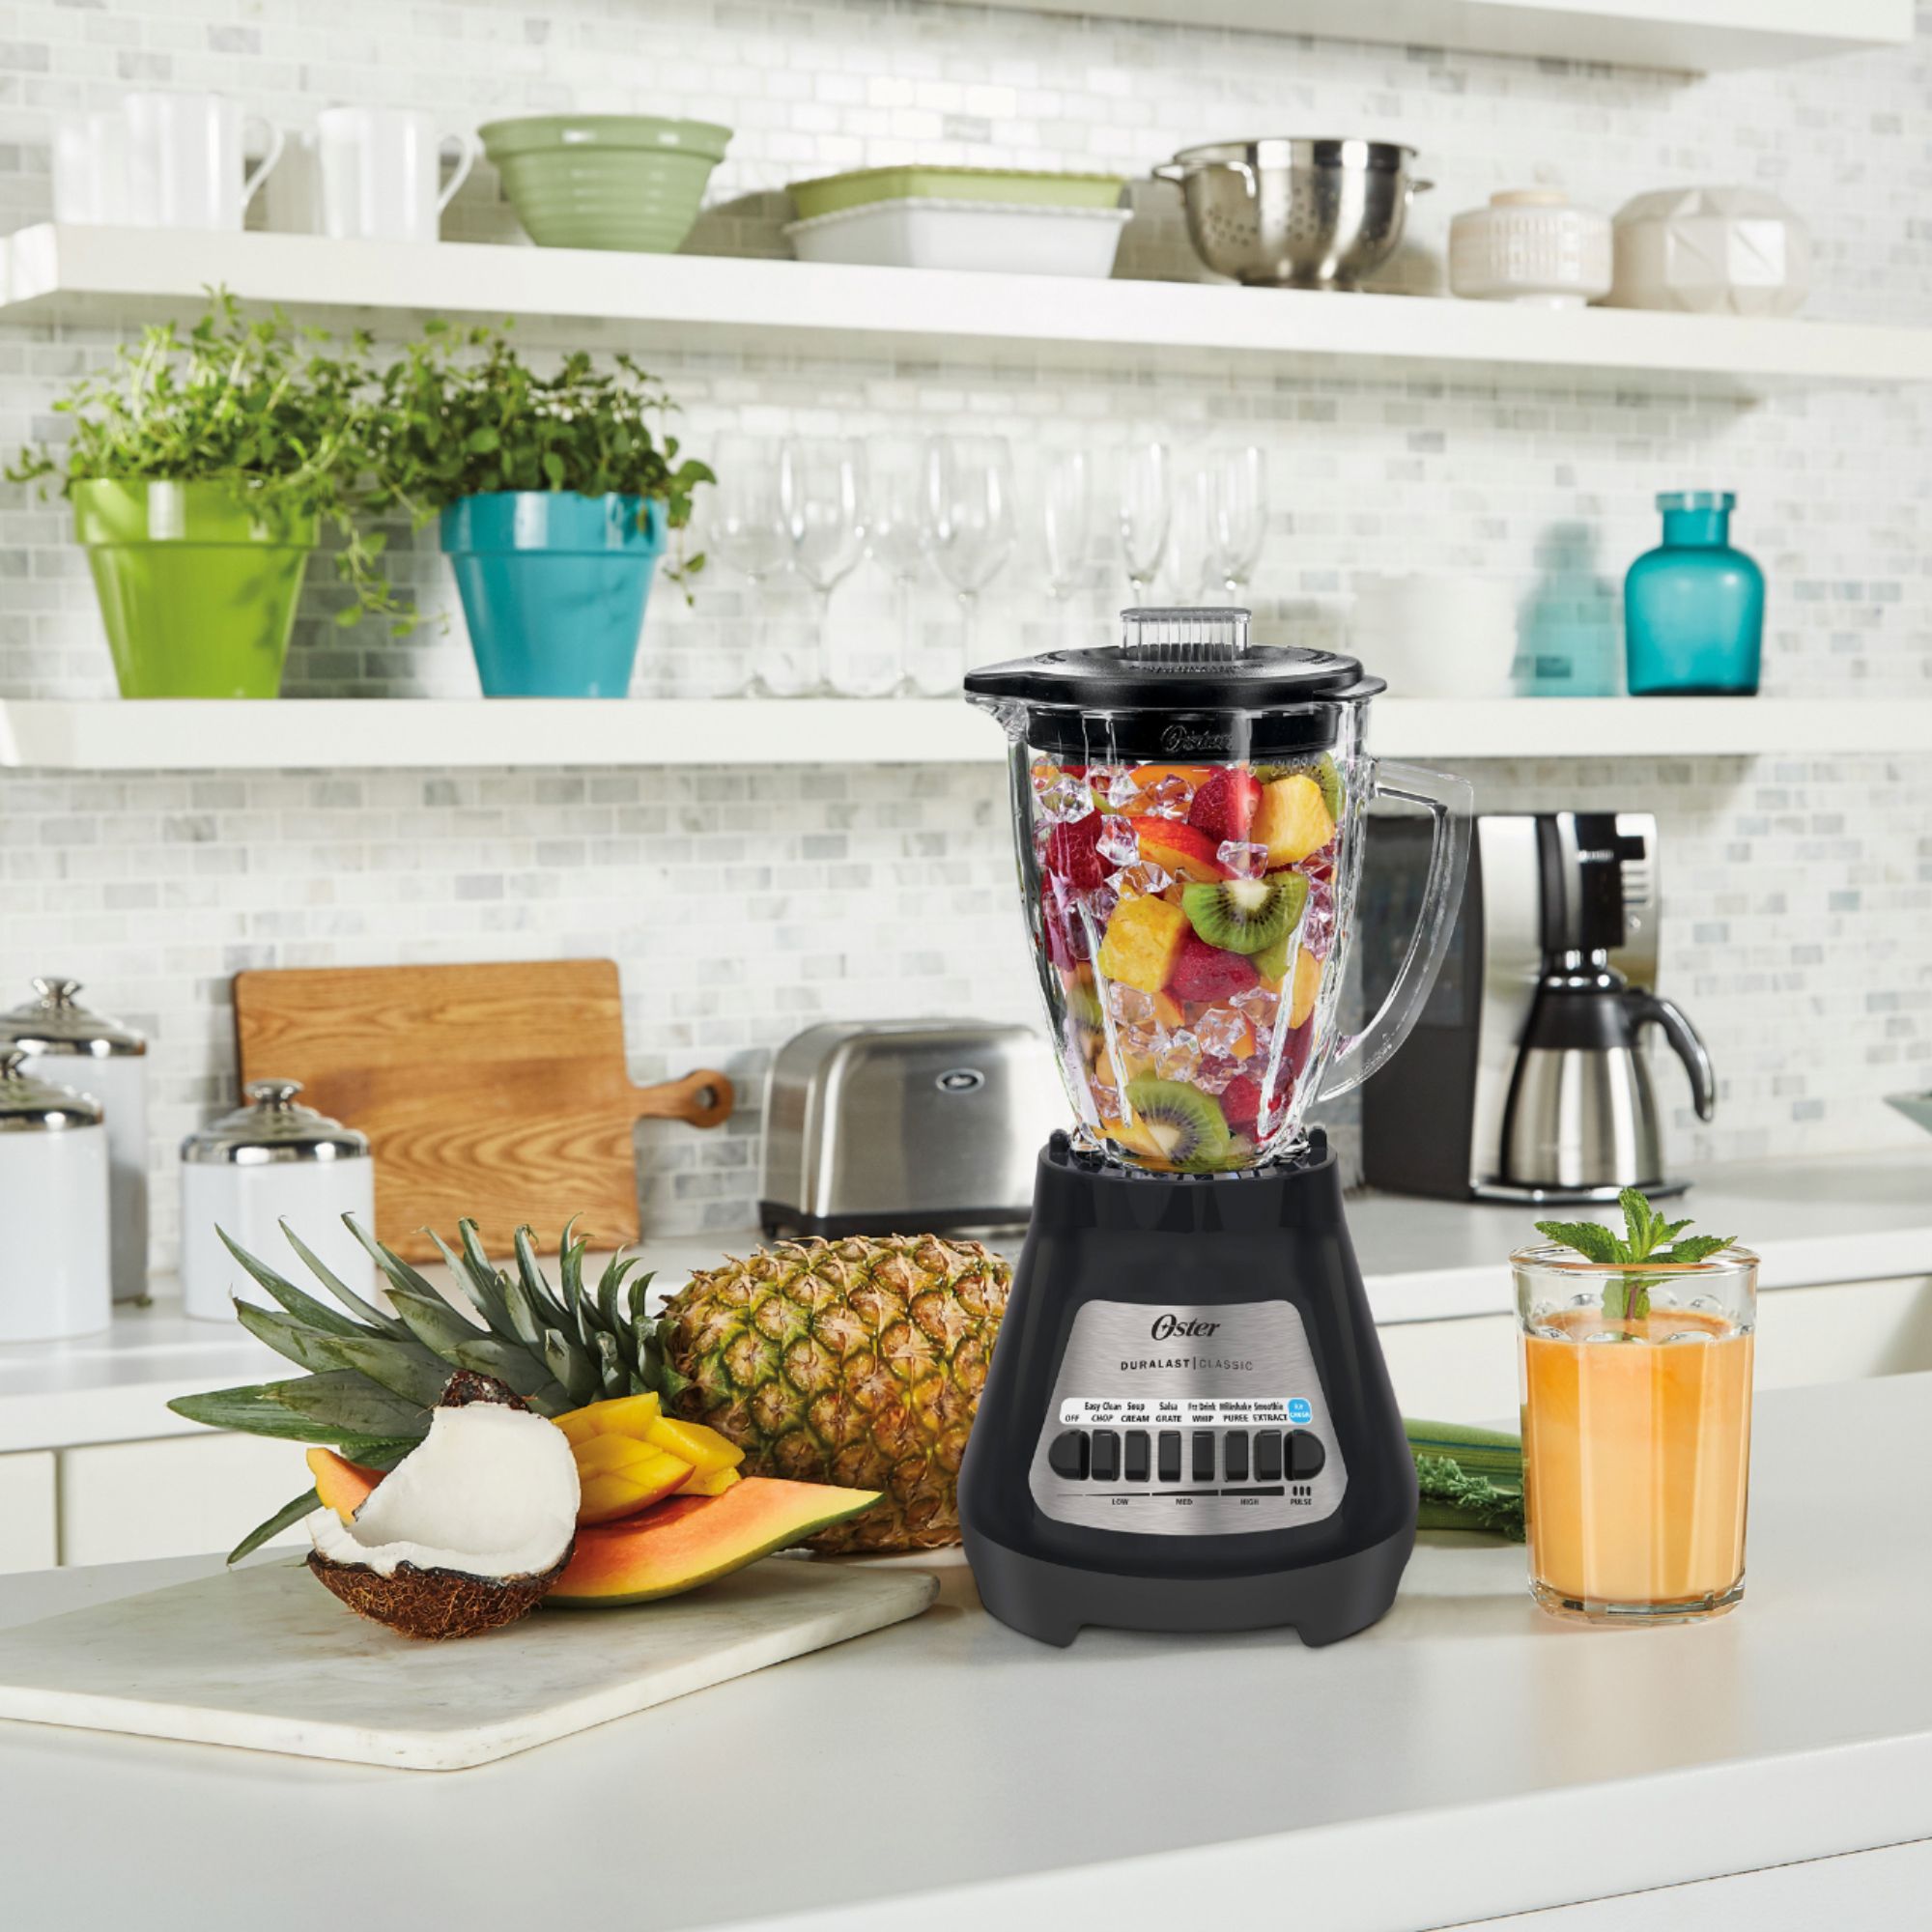 root today Peace of mind Best Buy: Oster Classic Series 8-Speed Blender Black BLSTMEGB00000